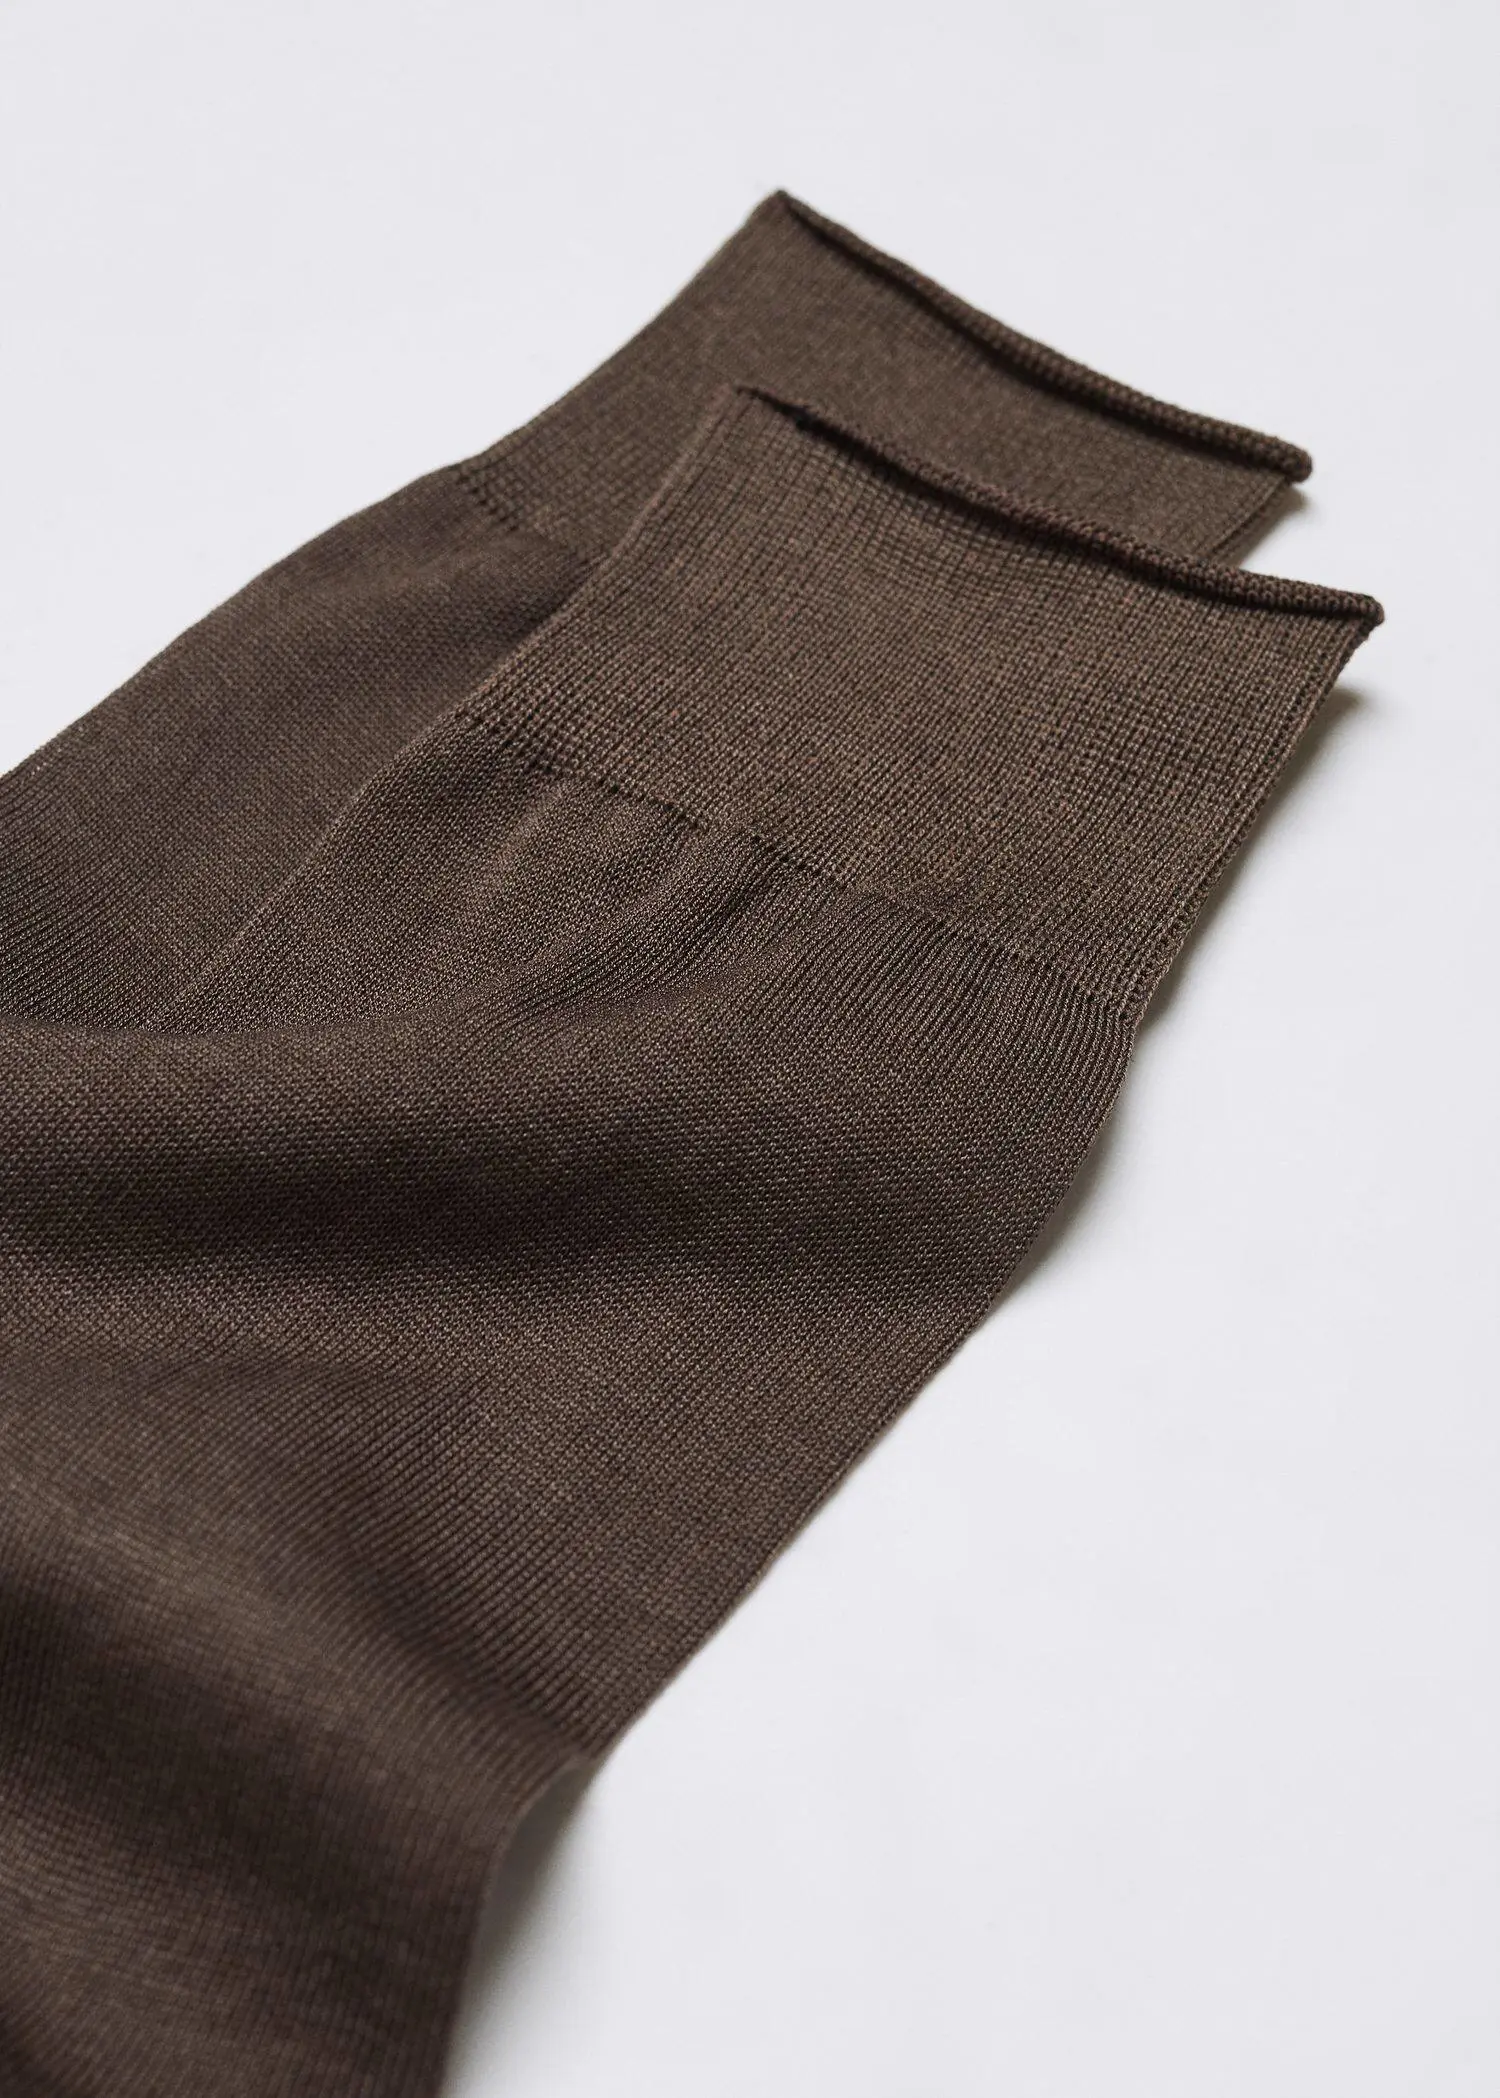 Mango 100% plain cotton socks. a pair of brown socks sitting on top of a white table. 